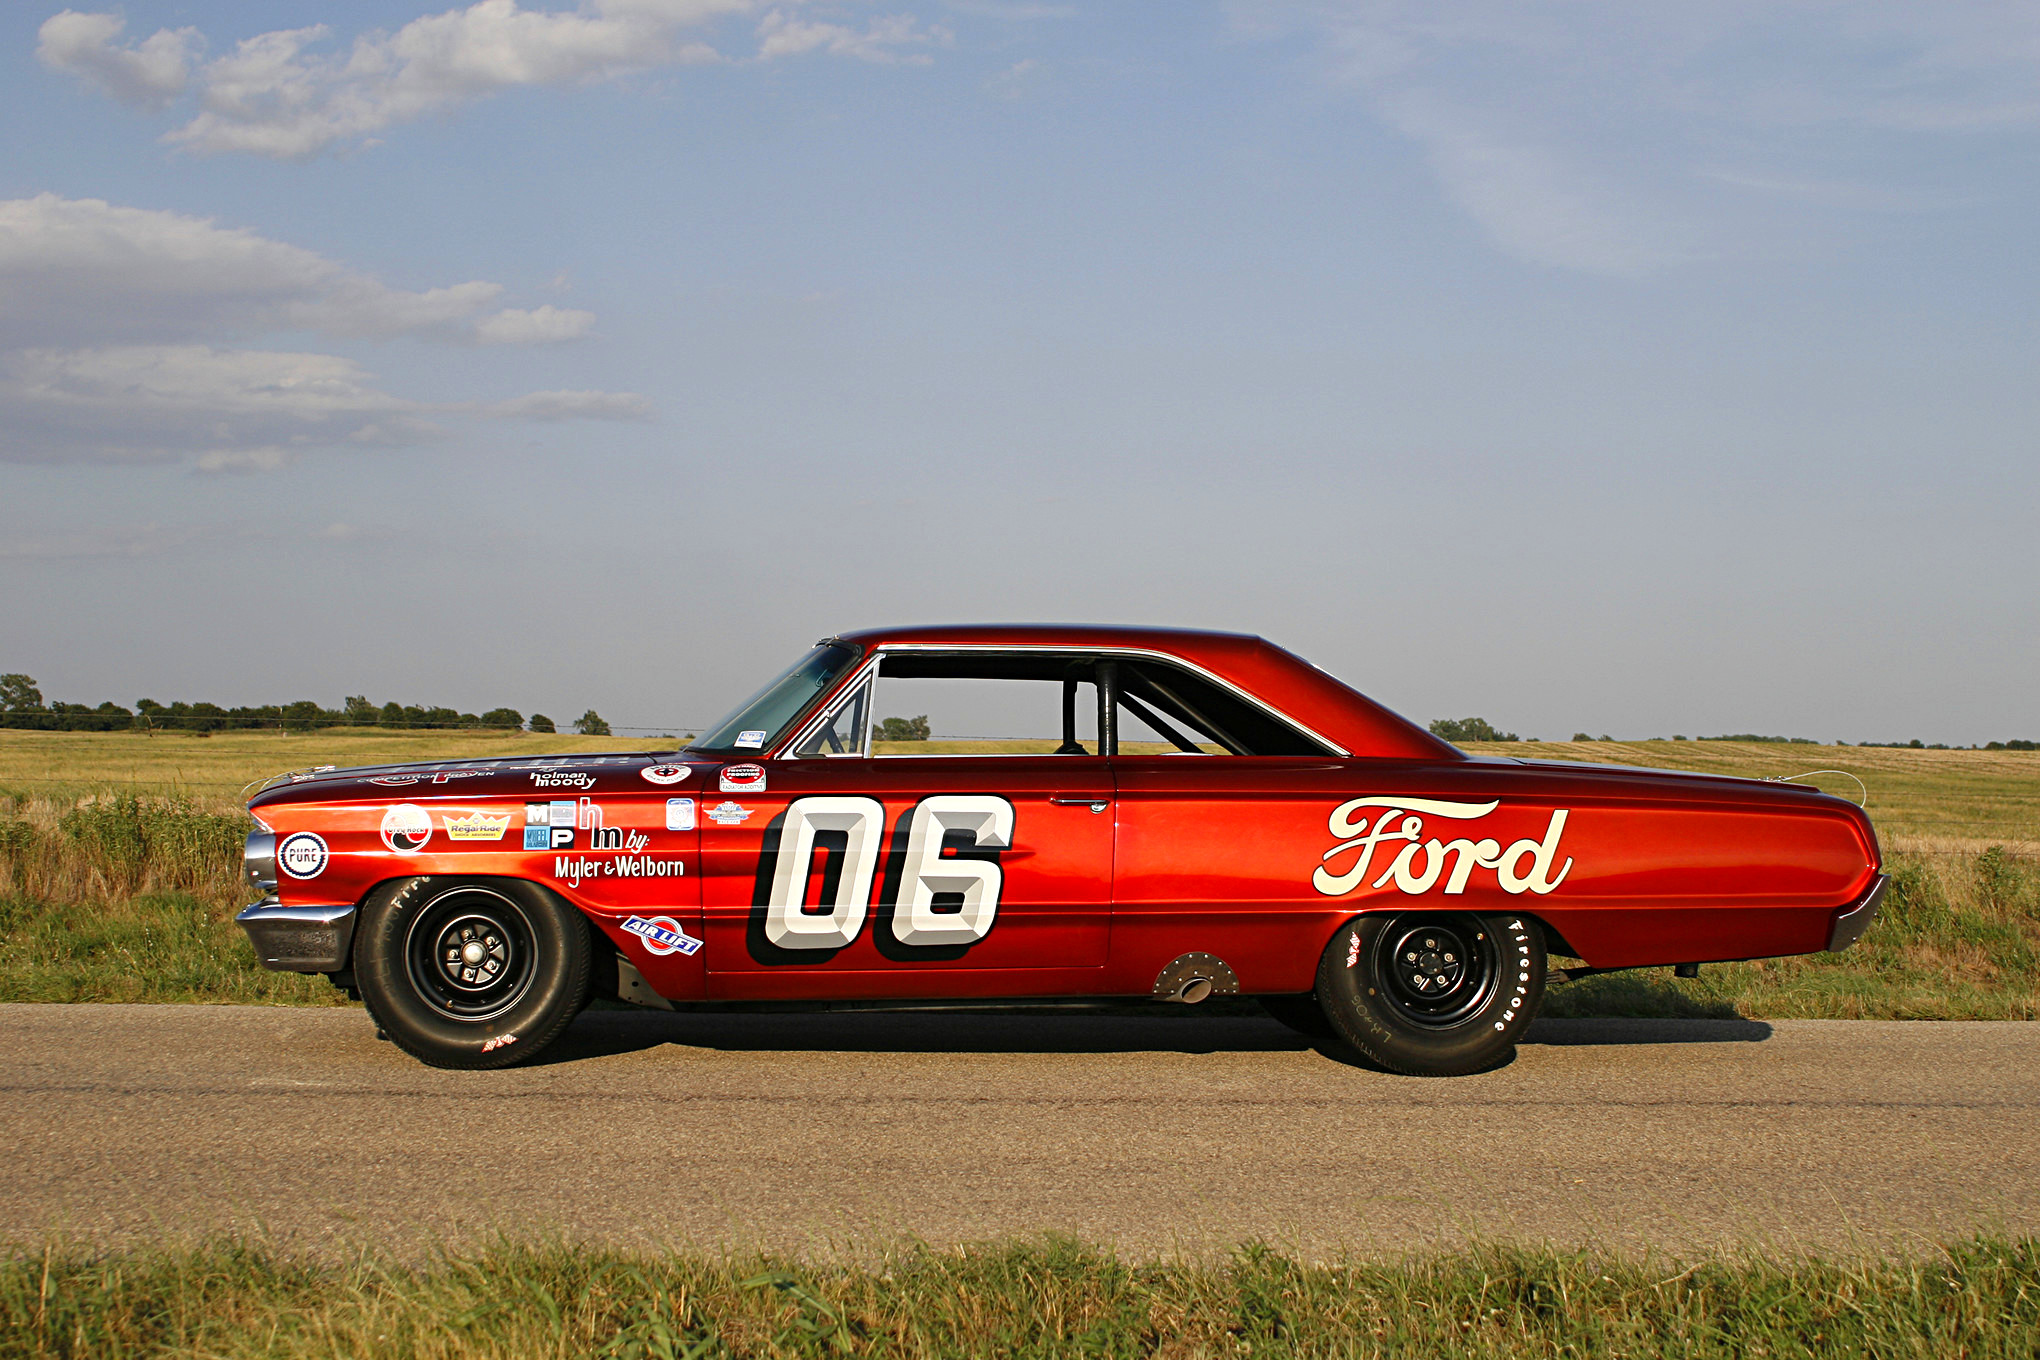 Ford Galaxie 500 Wallpapers